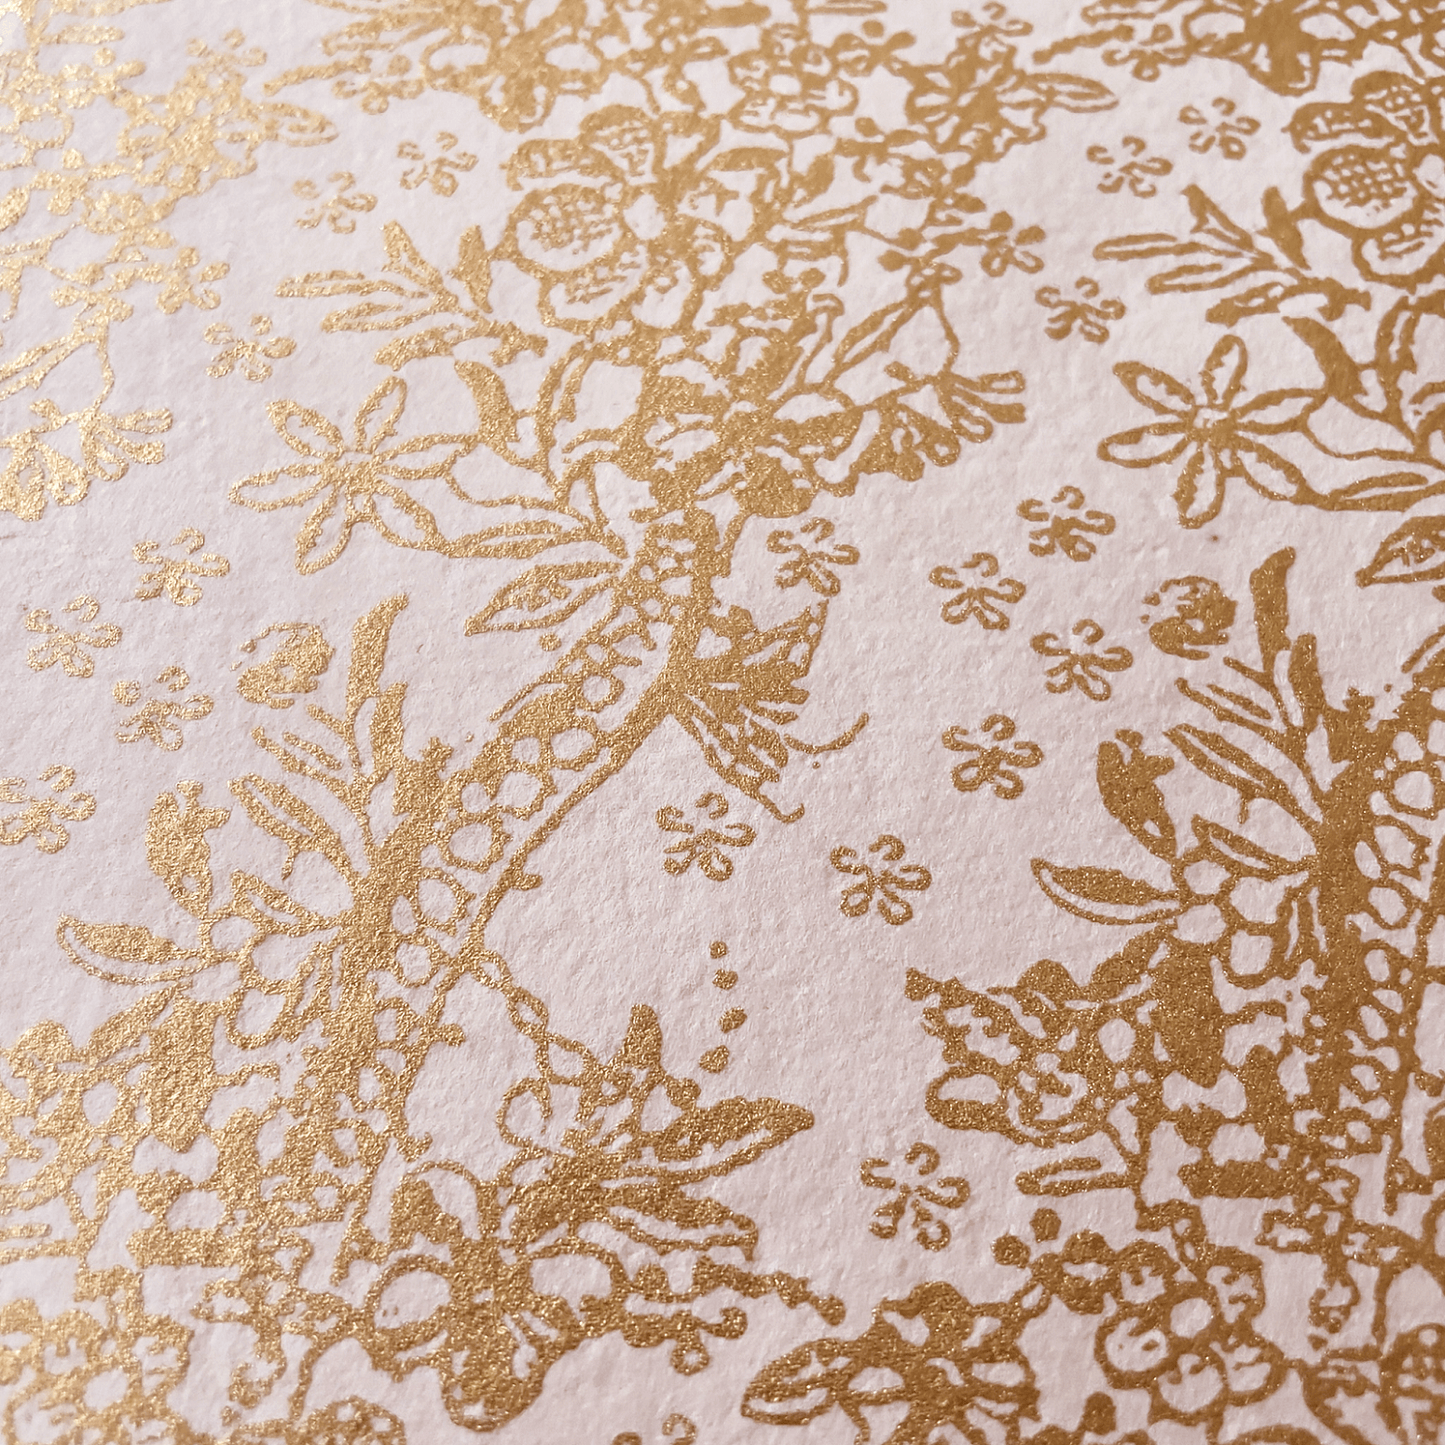 blush-pink-recycled-paper-with-floral-gold-pattern